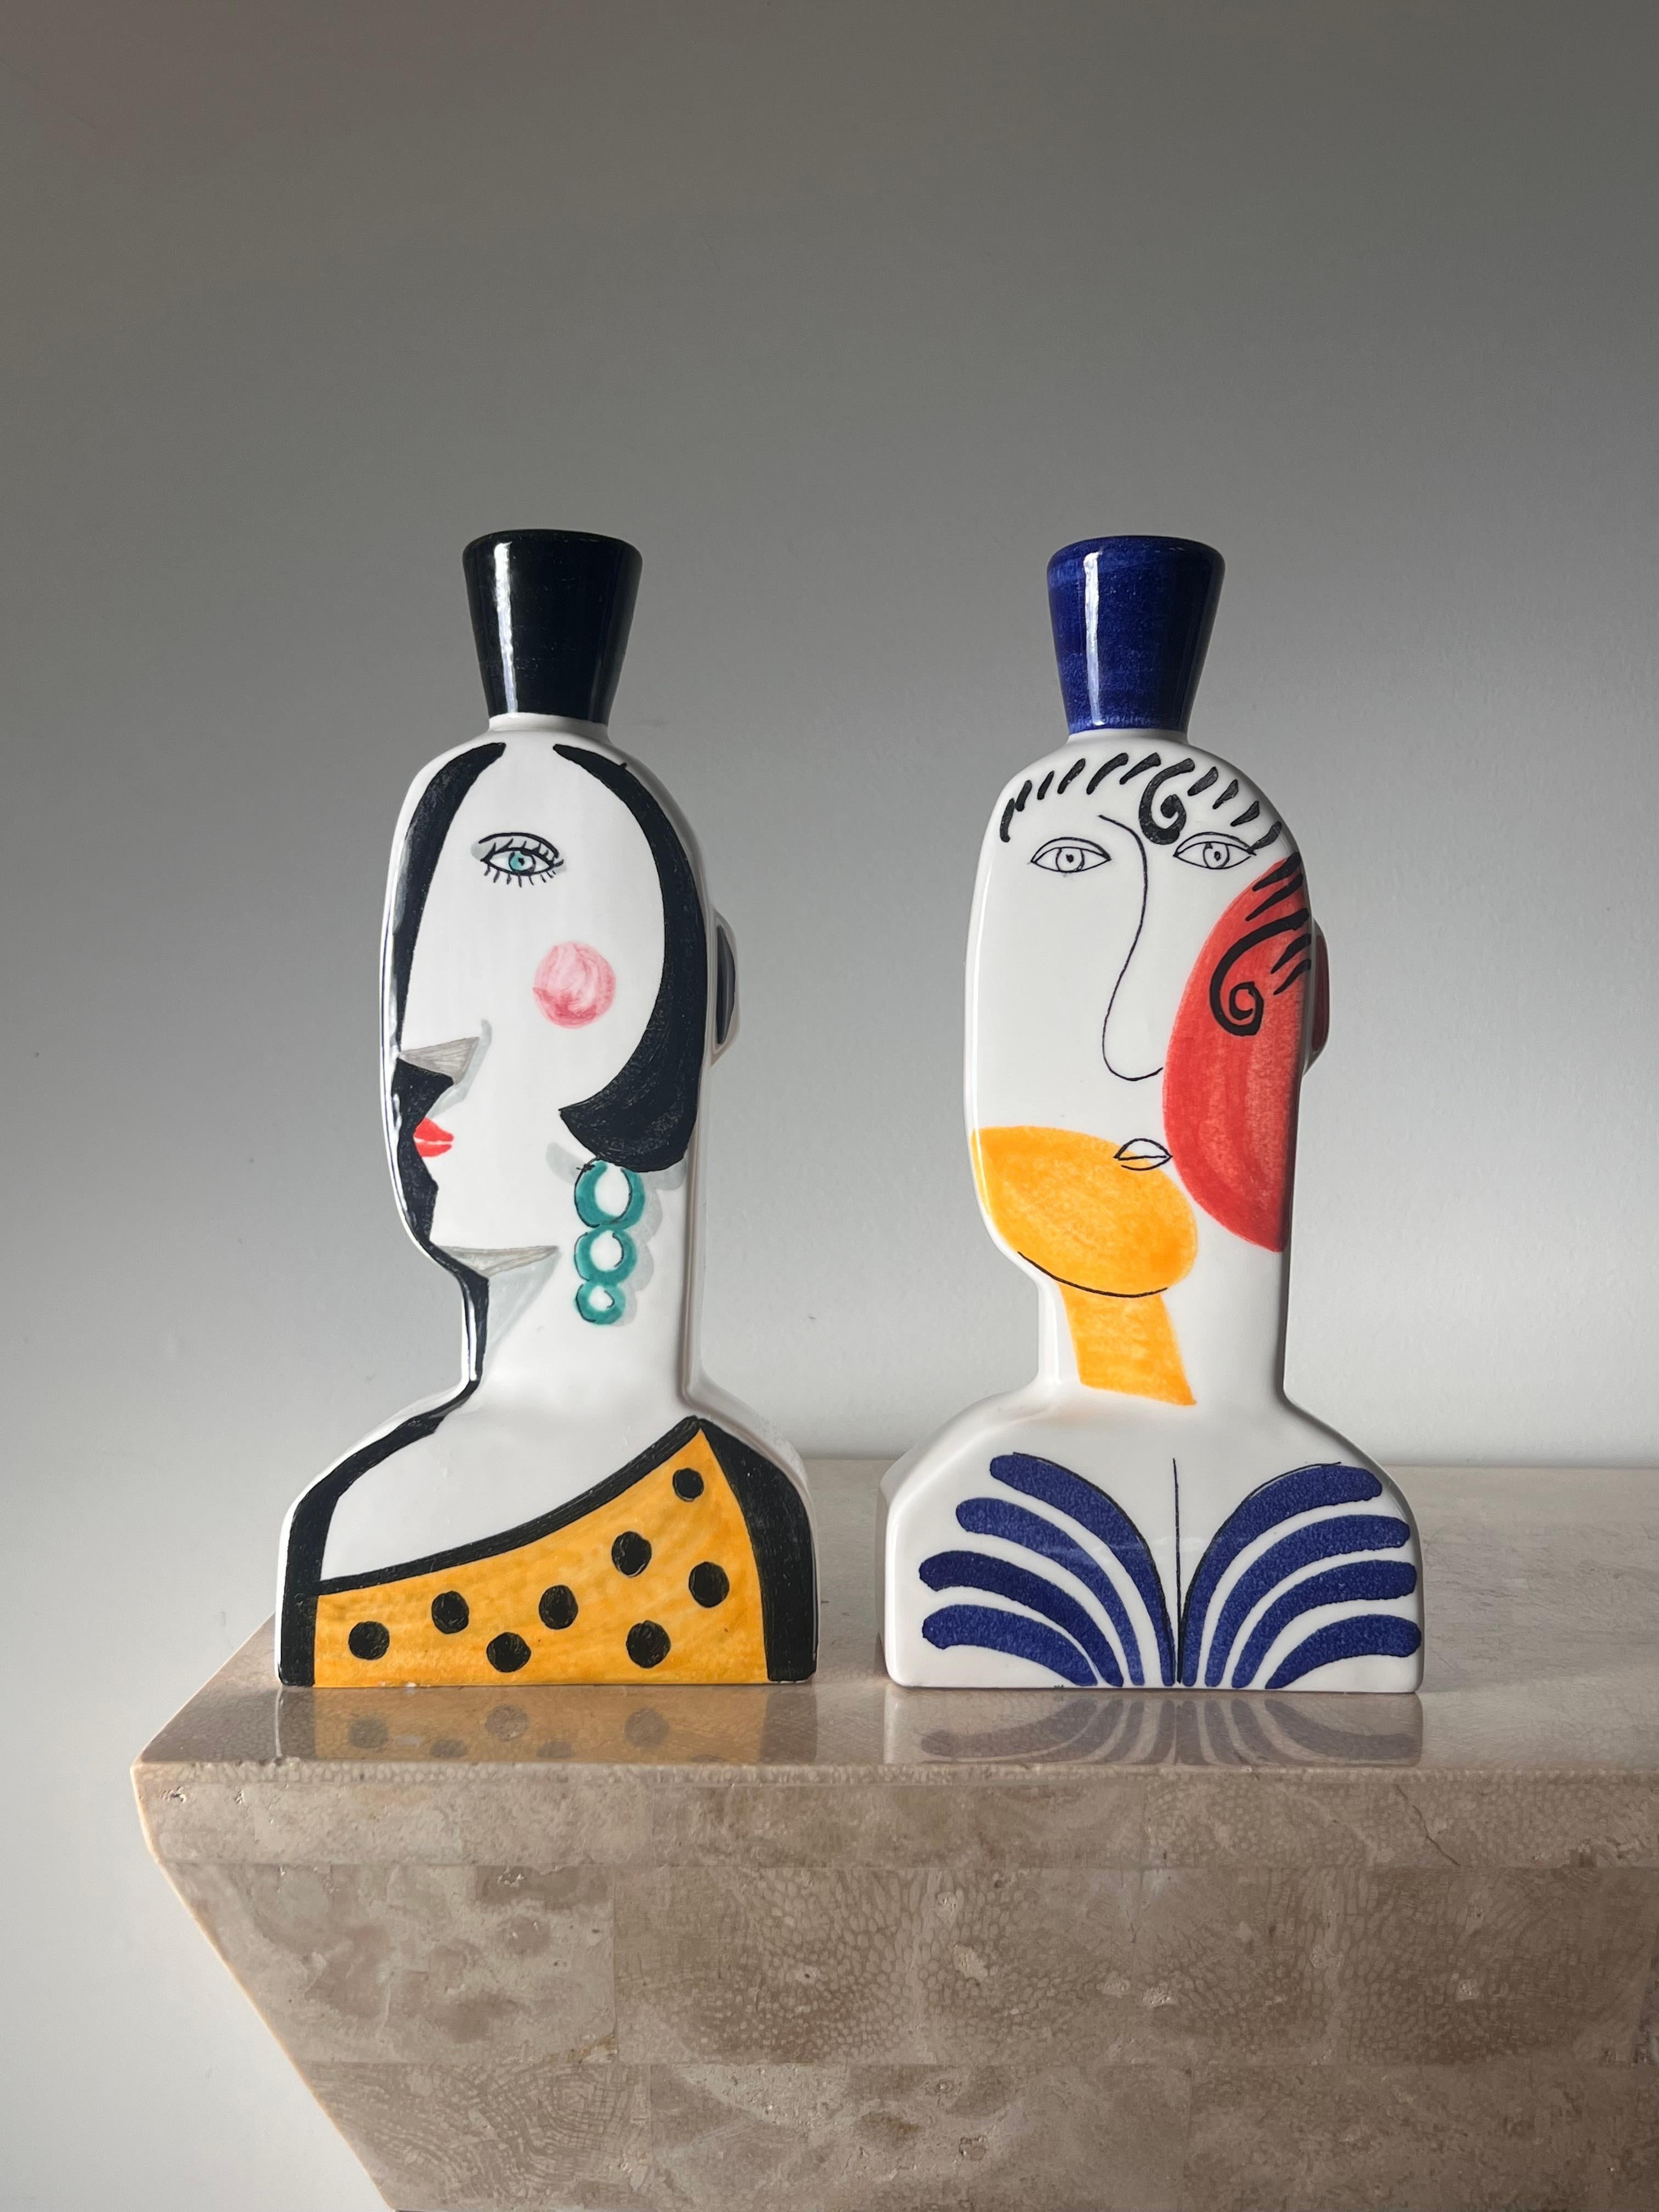 Spanish Cubist figurative “Face” candlesticks, signed by artist, 20th century 5